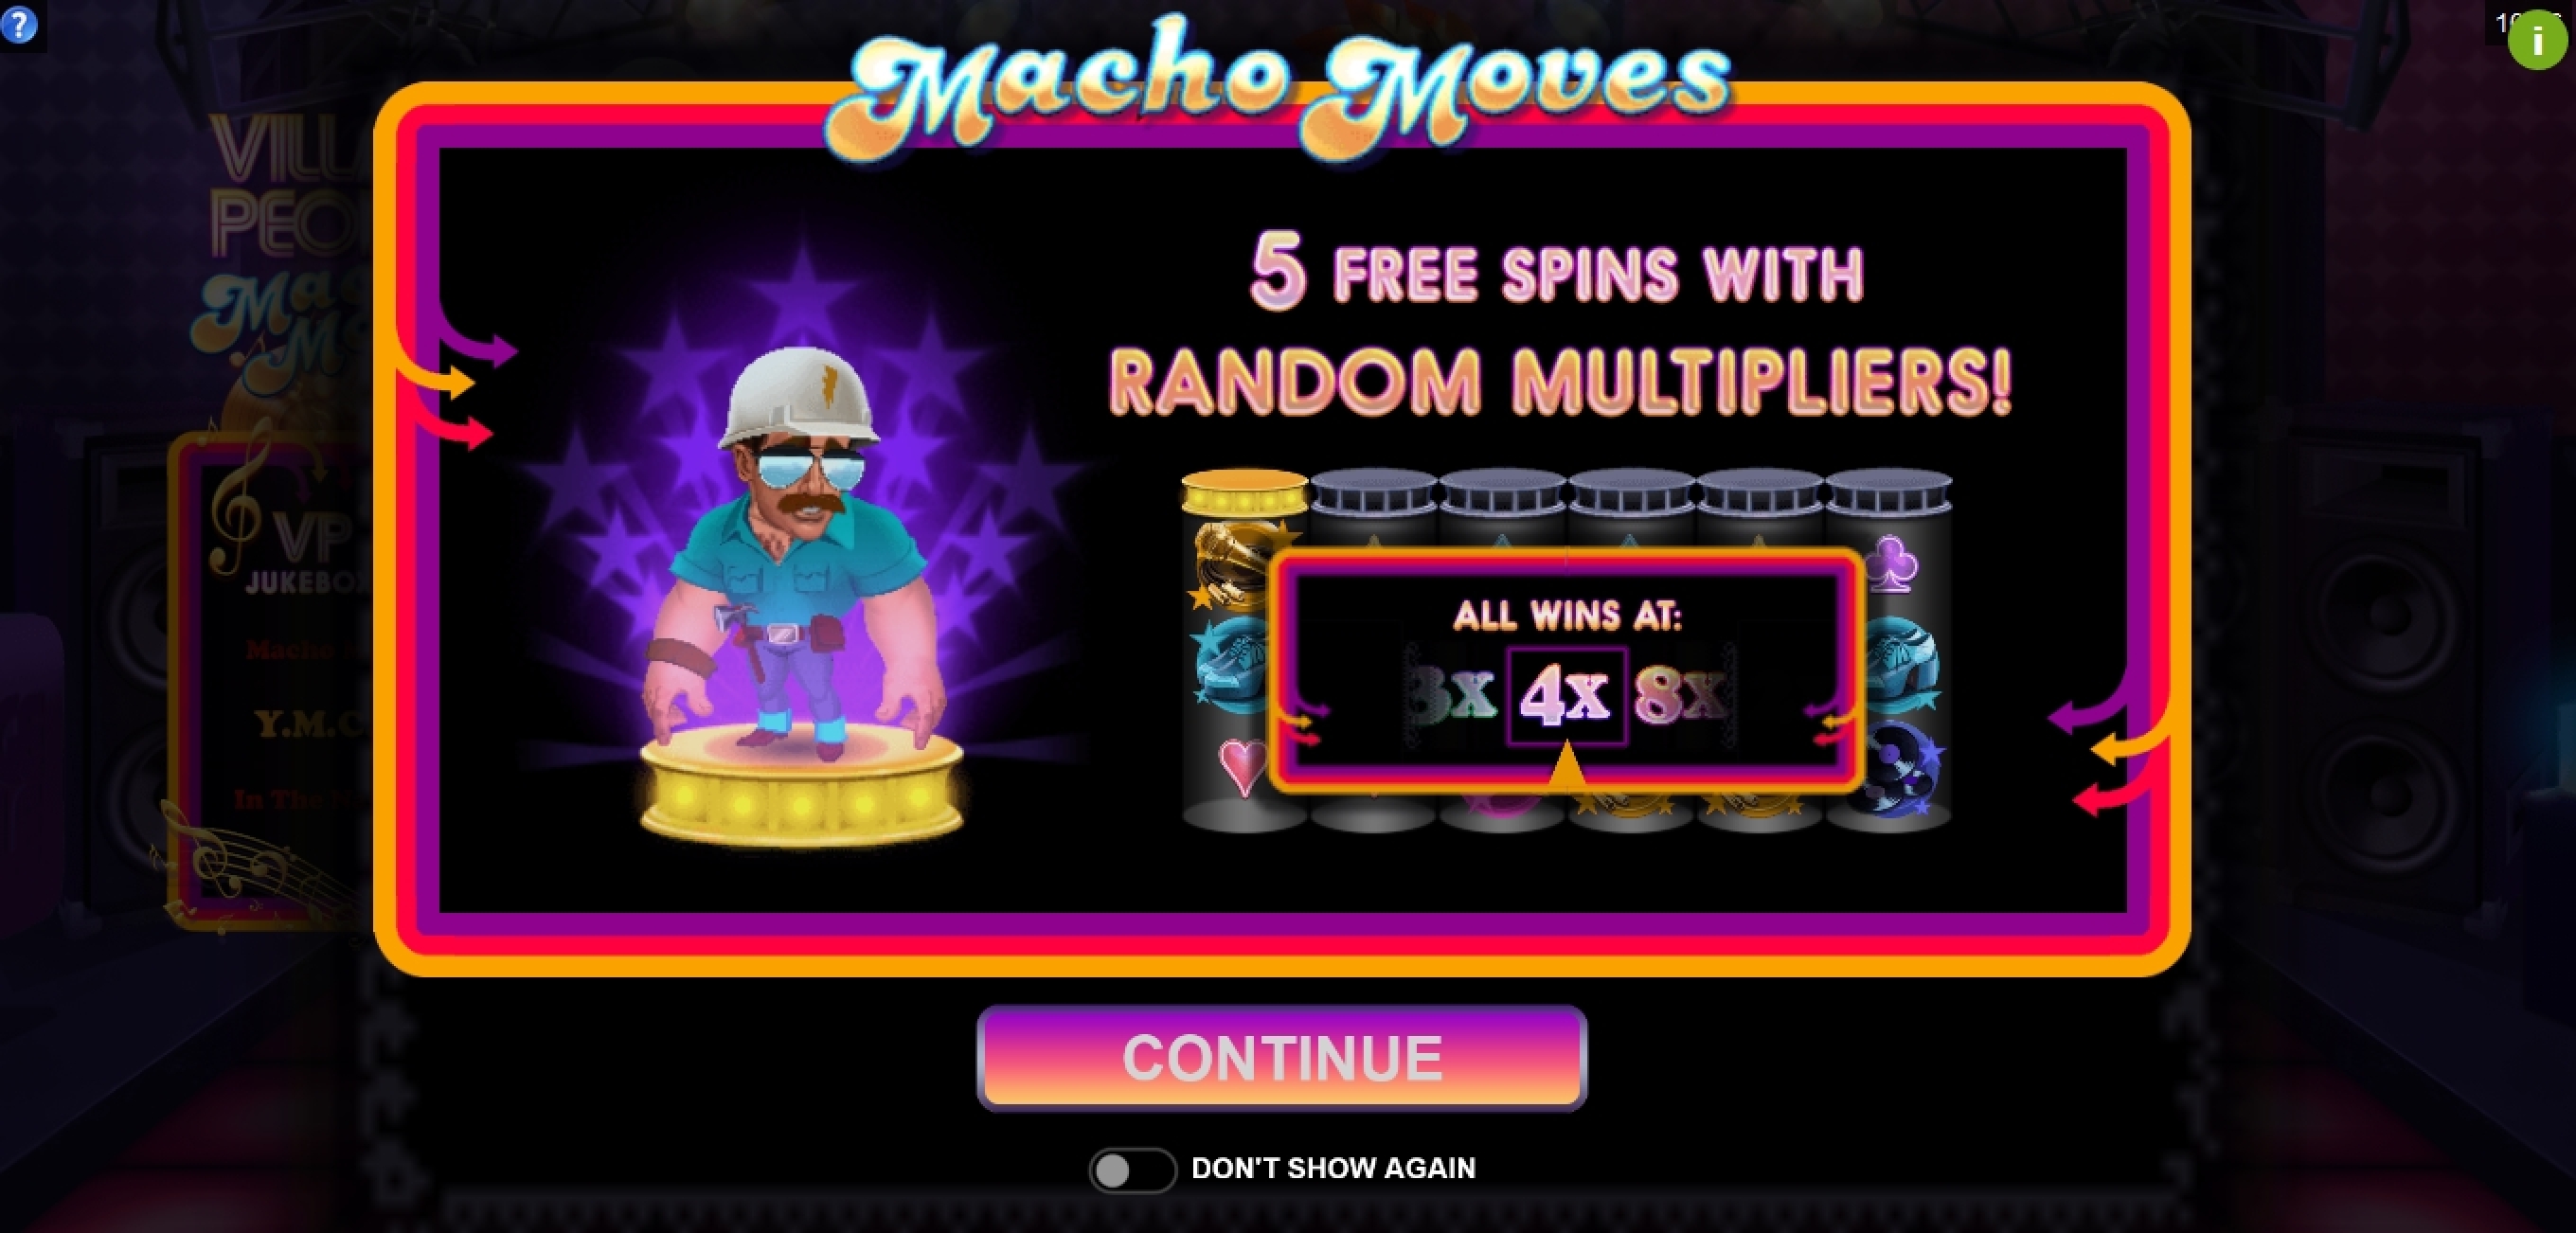 Play Village People Macho Moves Free Casino Slot Game by Fortune Factory Studios